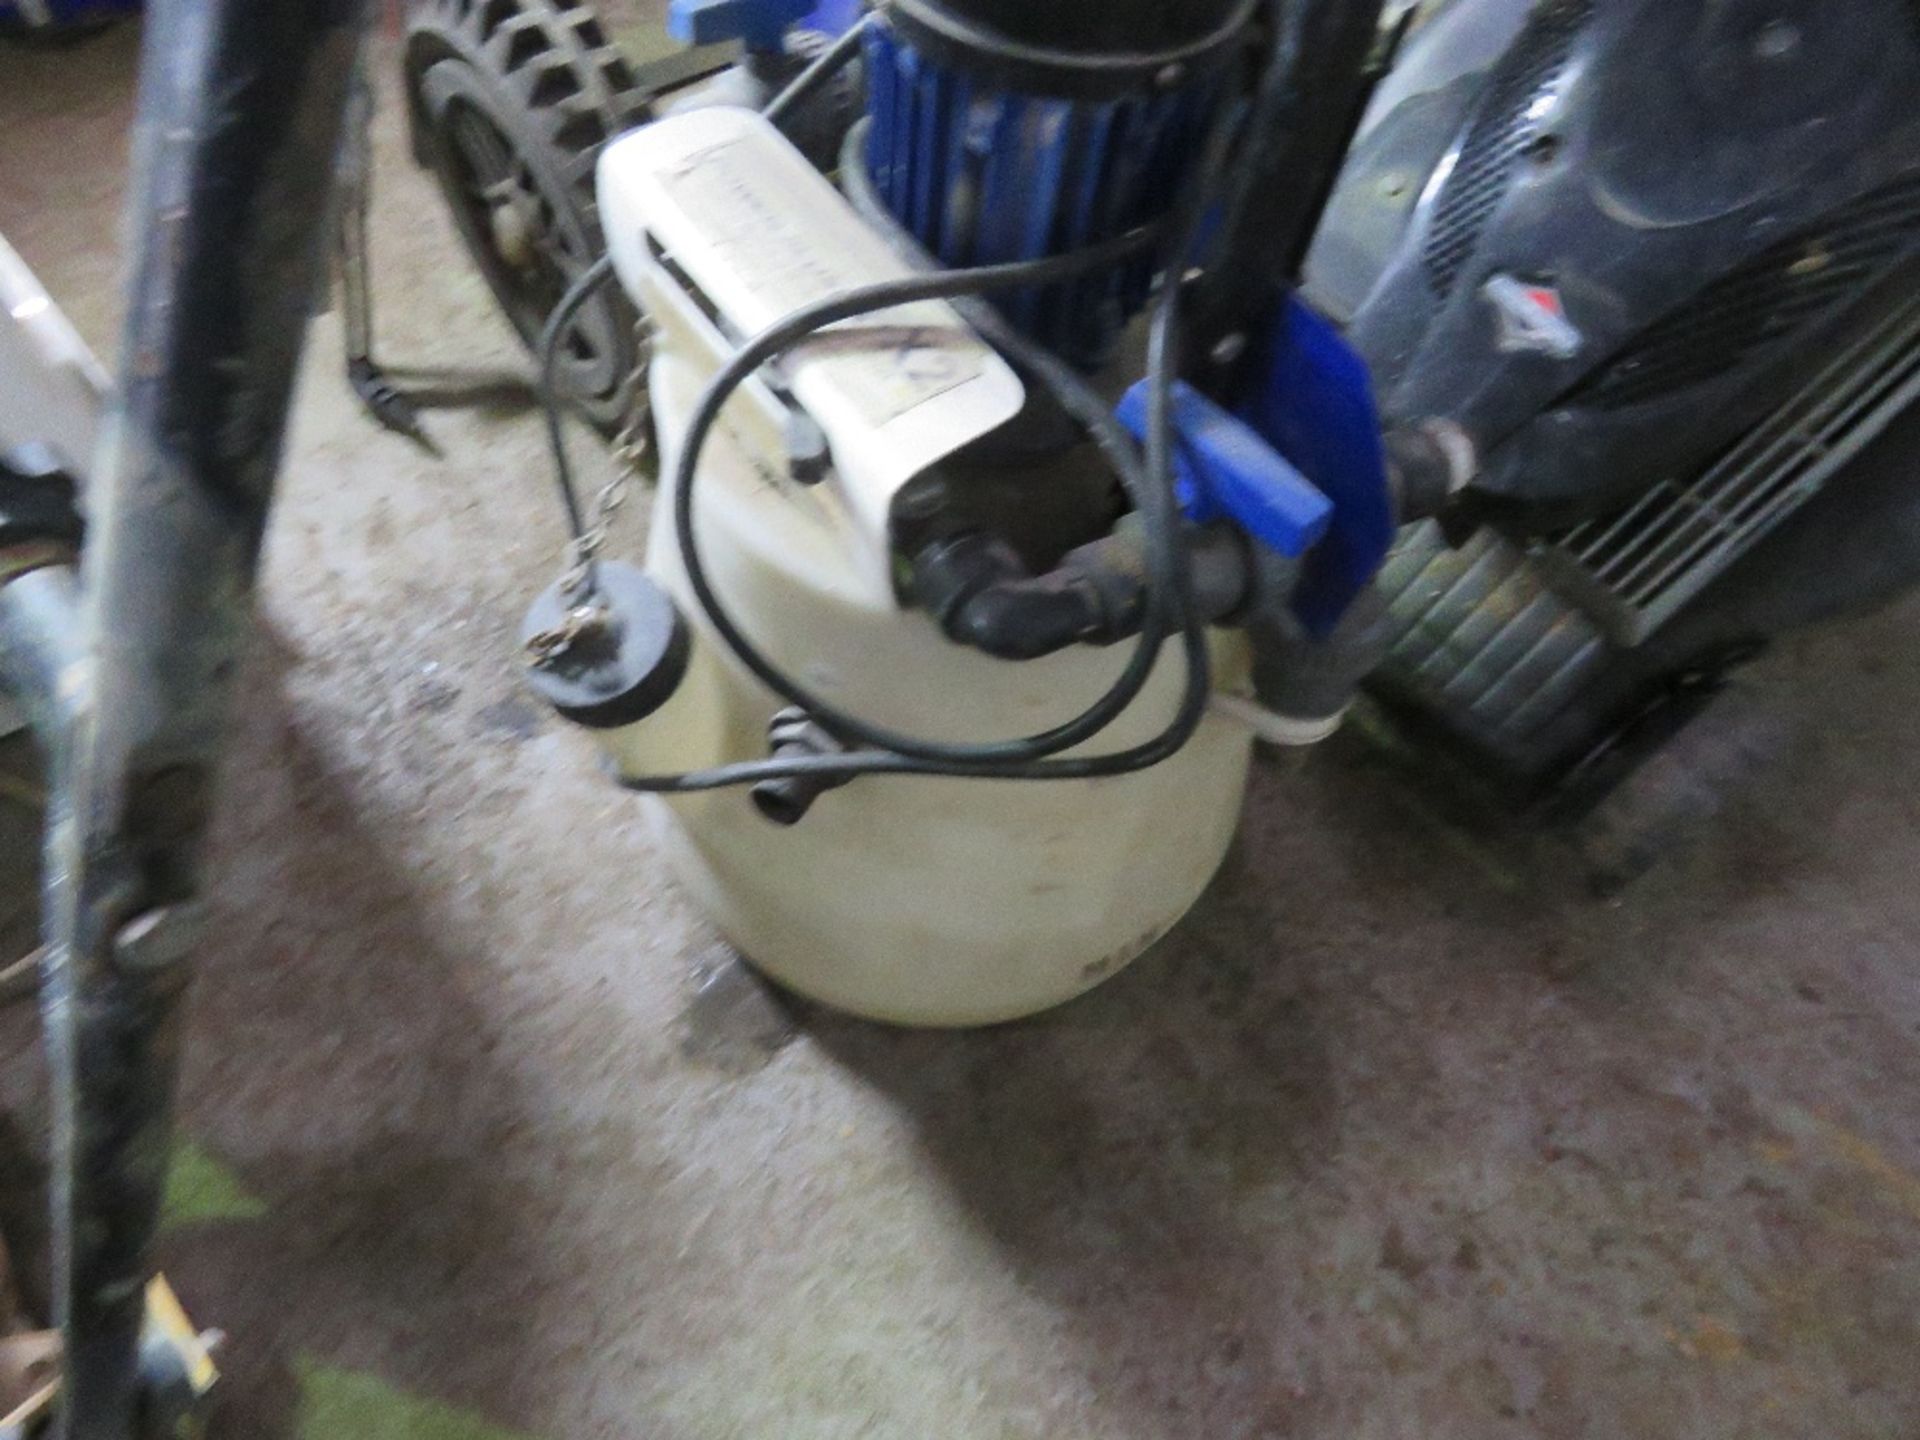 POWER FLUSH UNIT FOR CENTRAL HEATING, 240 VOLT POWERED. THIS LOT IS SOLD UNDER THE AUCTIONEERS MARGI